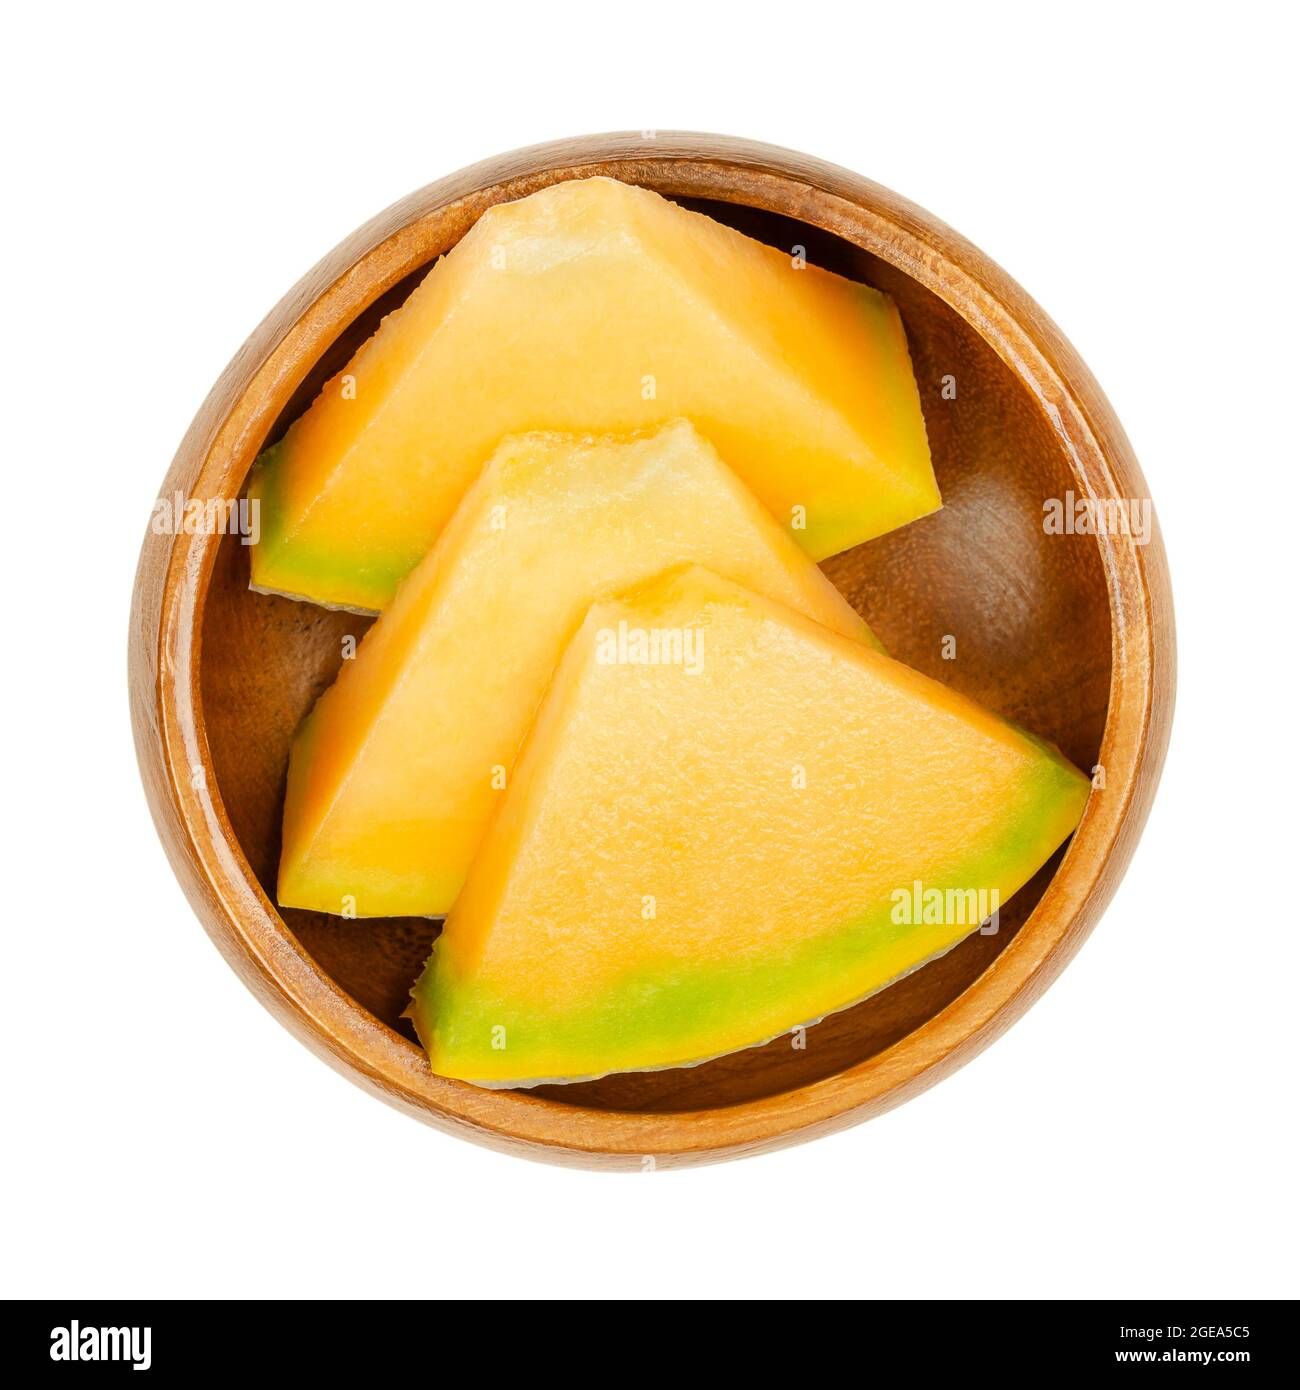 Honey Cantaloupe melon slices, in a wooden bowl. Triangular, ready-to-eat pieces of freshly cut, ripe fruit. Hybrid melon of species Cucumis melo. Stock Photo